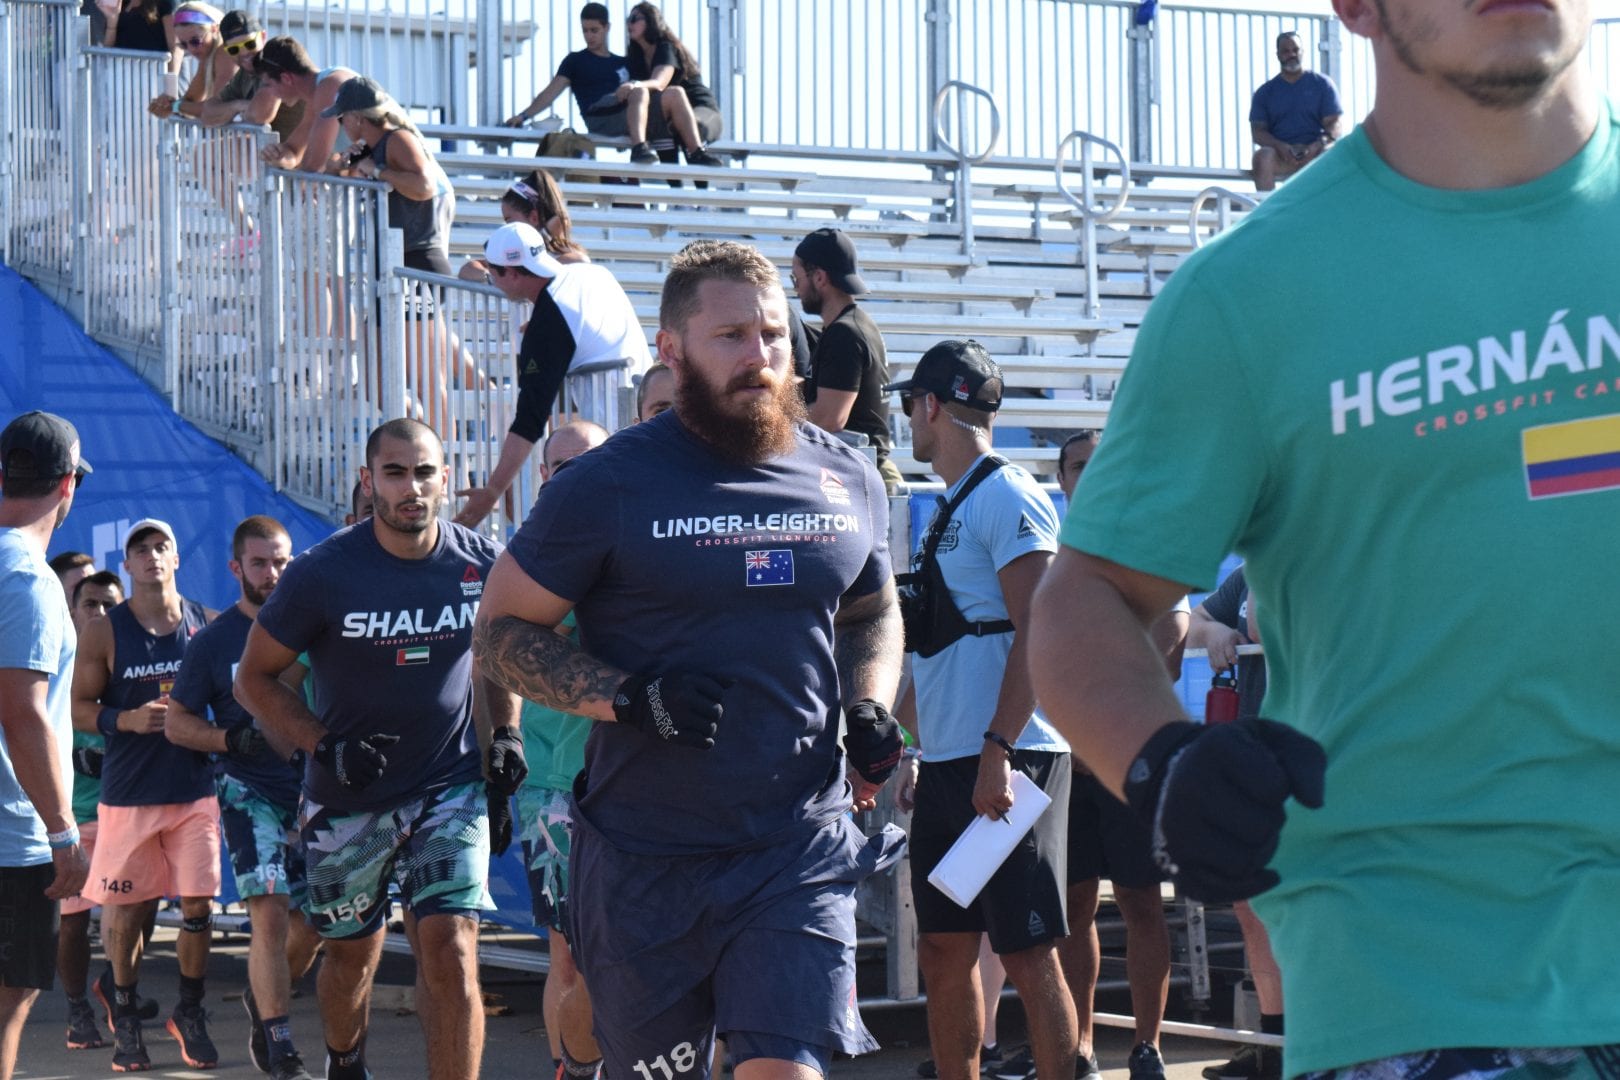 Dean Linder-Leighton enters the stadium for the first event of the 2019 CrossFit Games